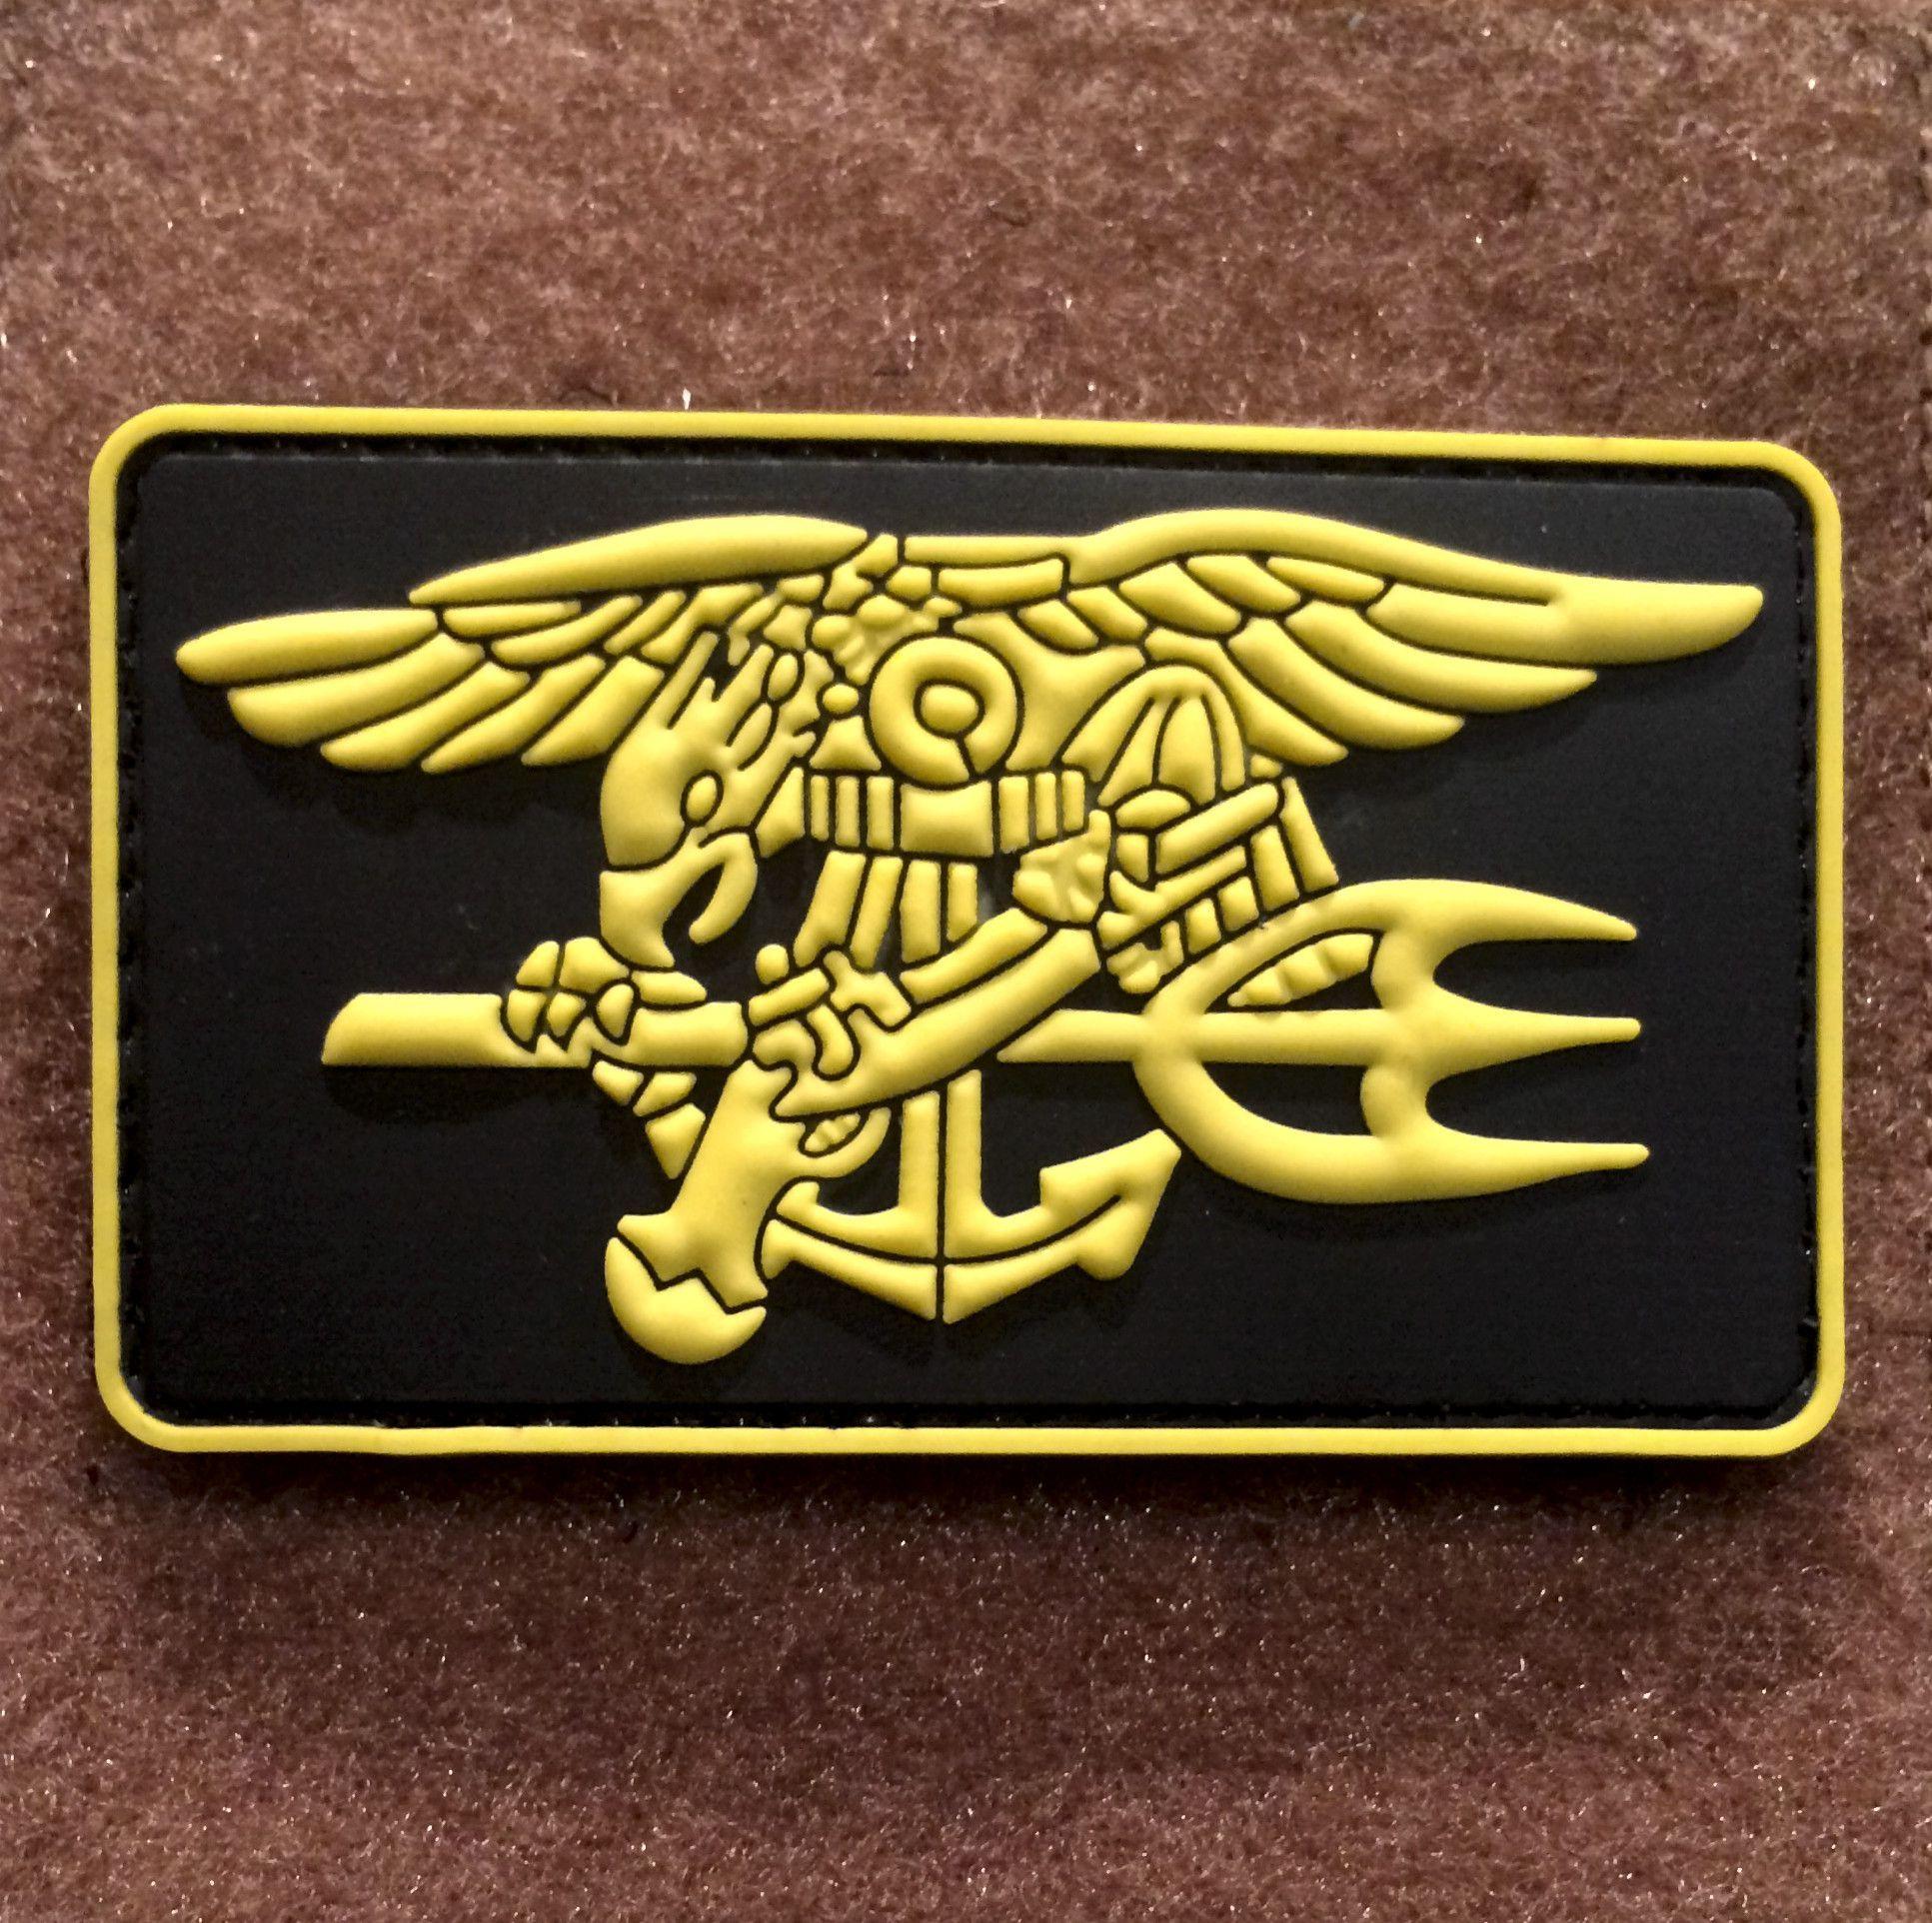 Trident Military Logo - Navy SEAL Trident PVC Morale Patch | Products | Pinterest | Navy ...